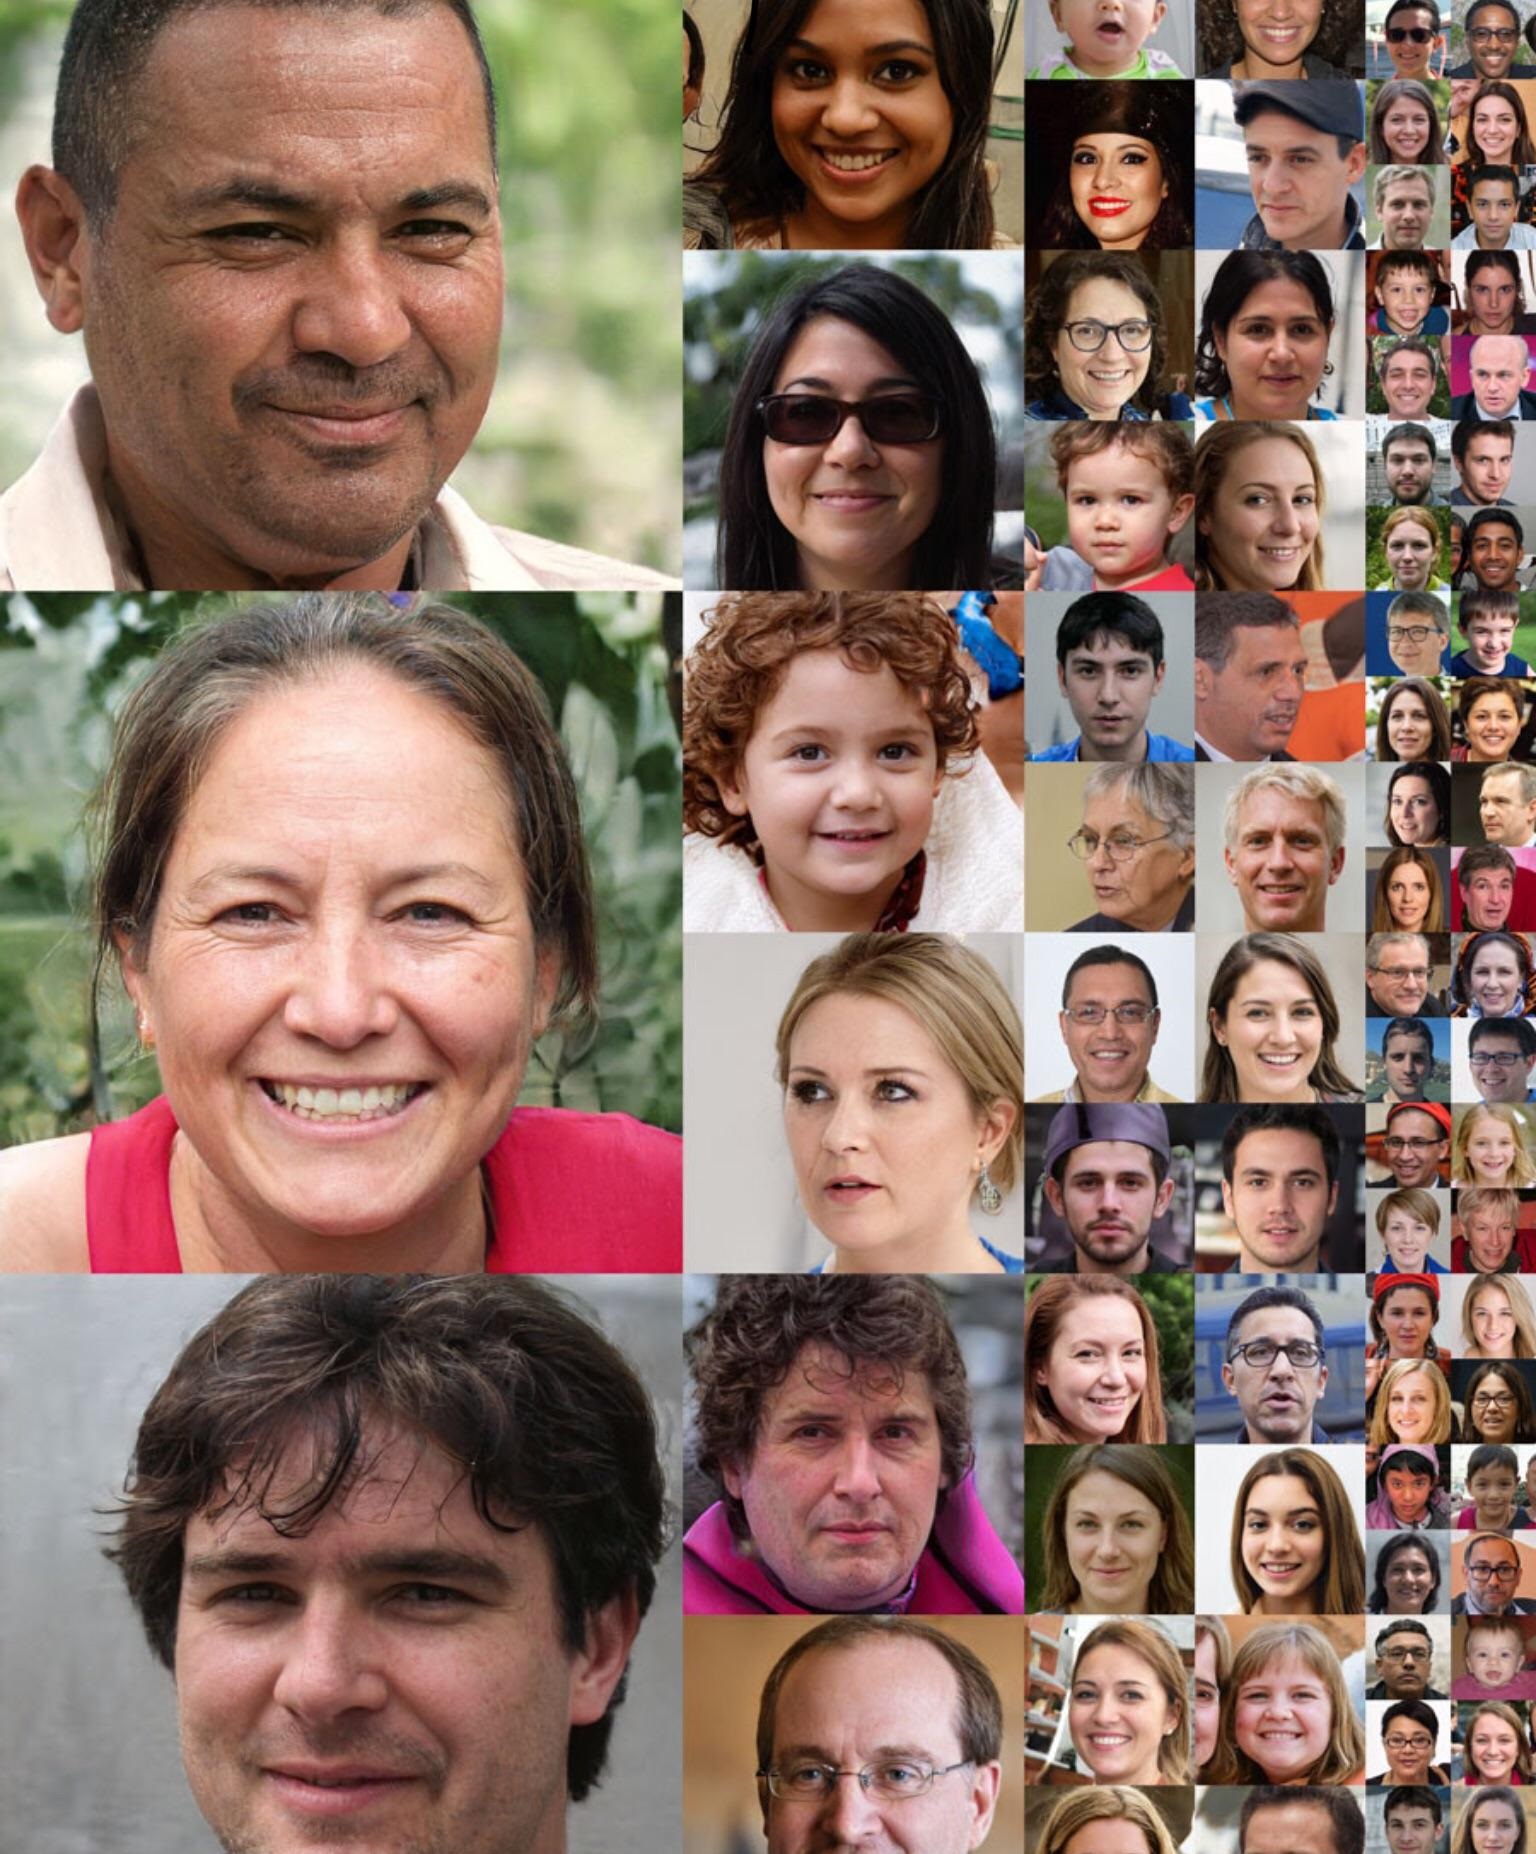 These are all faces made by NIVIDIA’s neuro-network, none of them are real